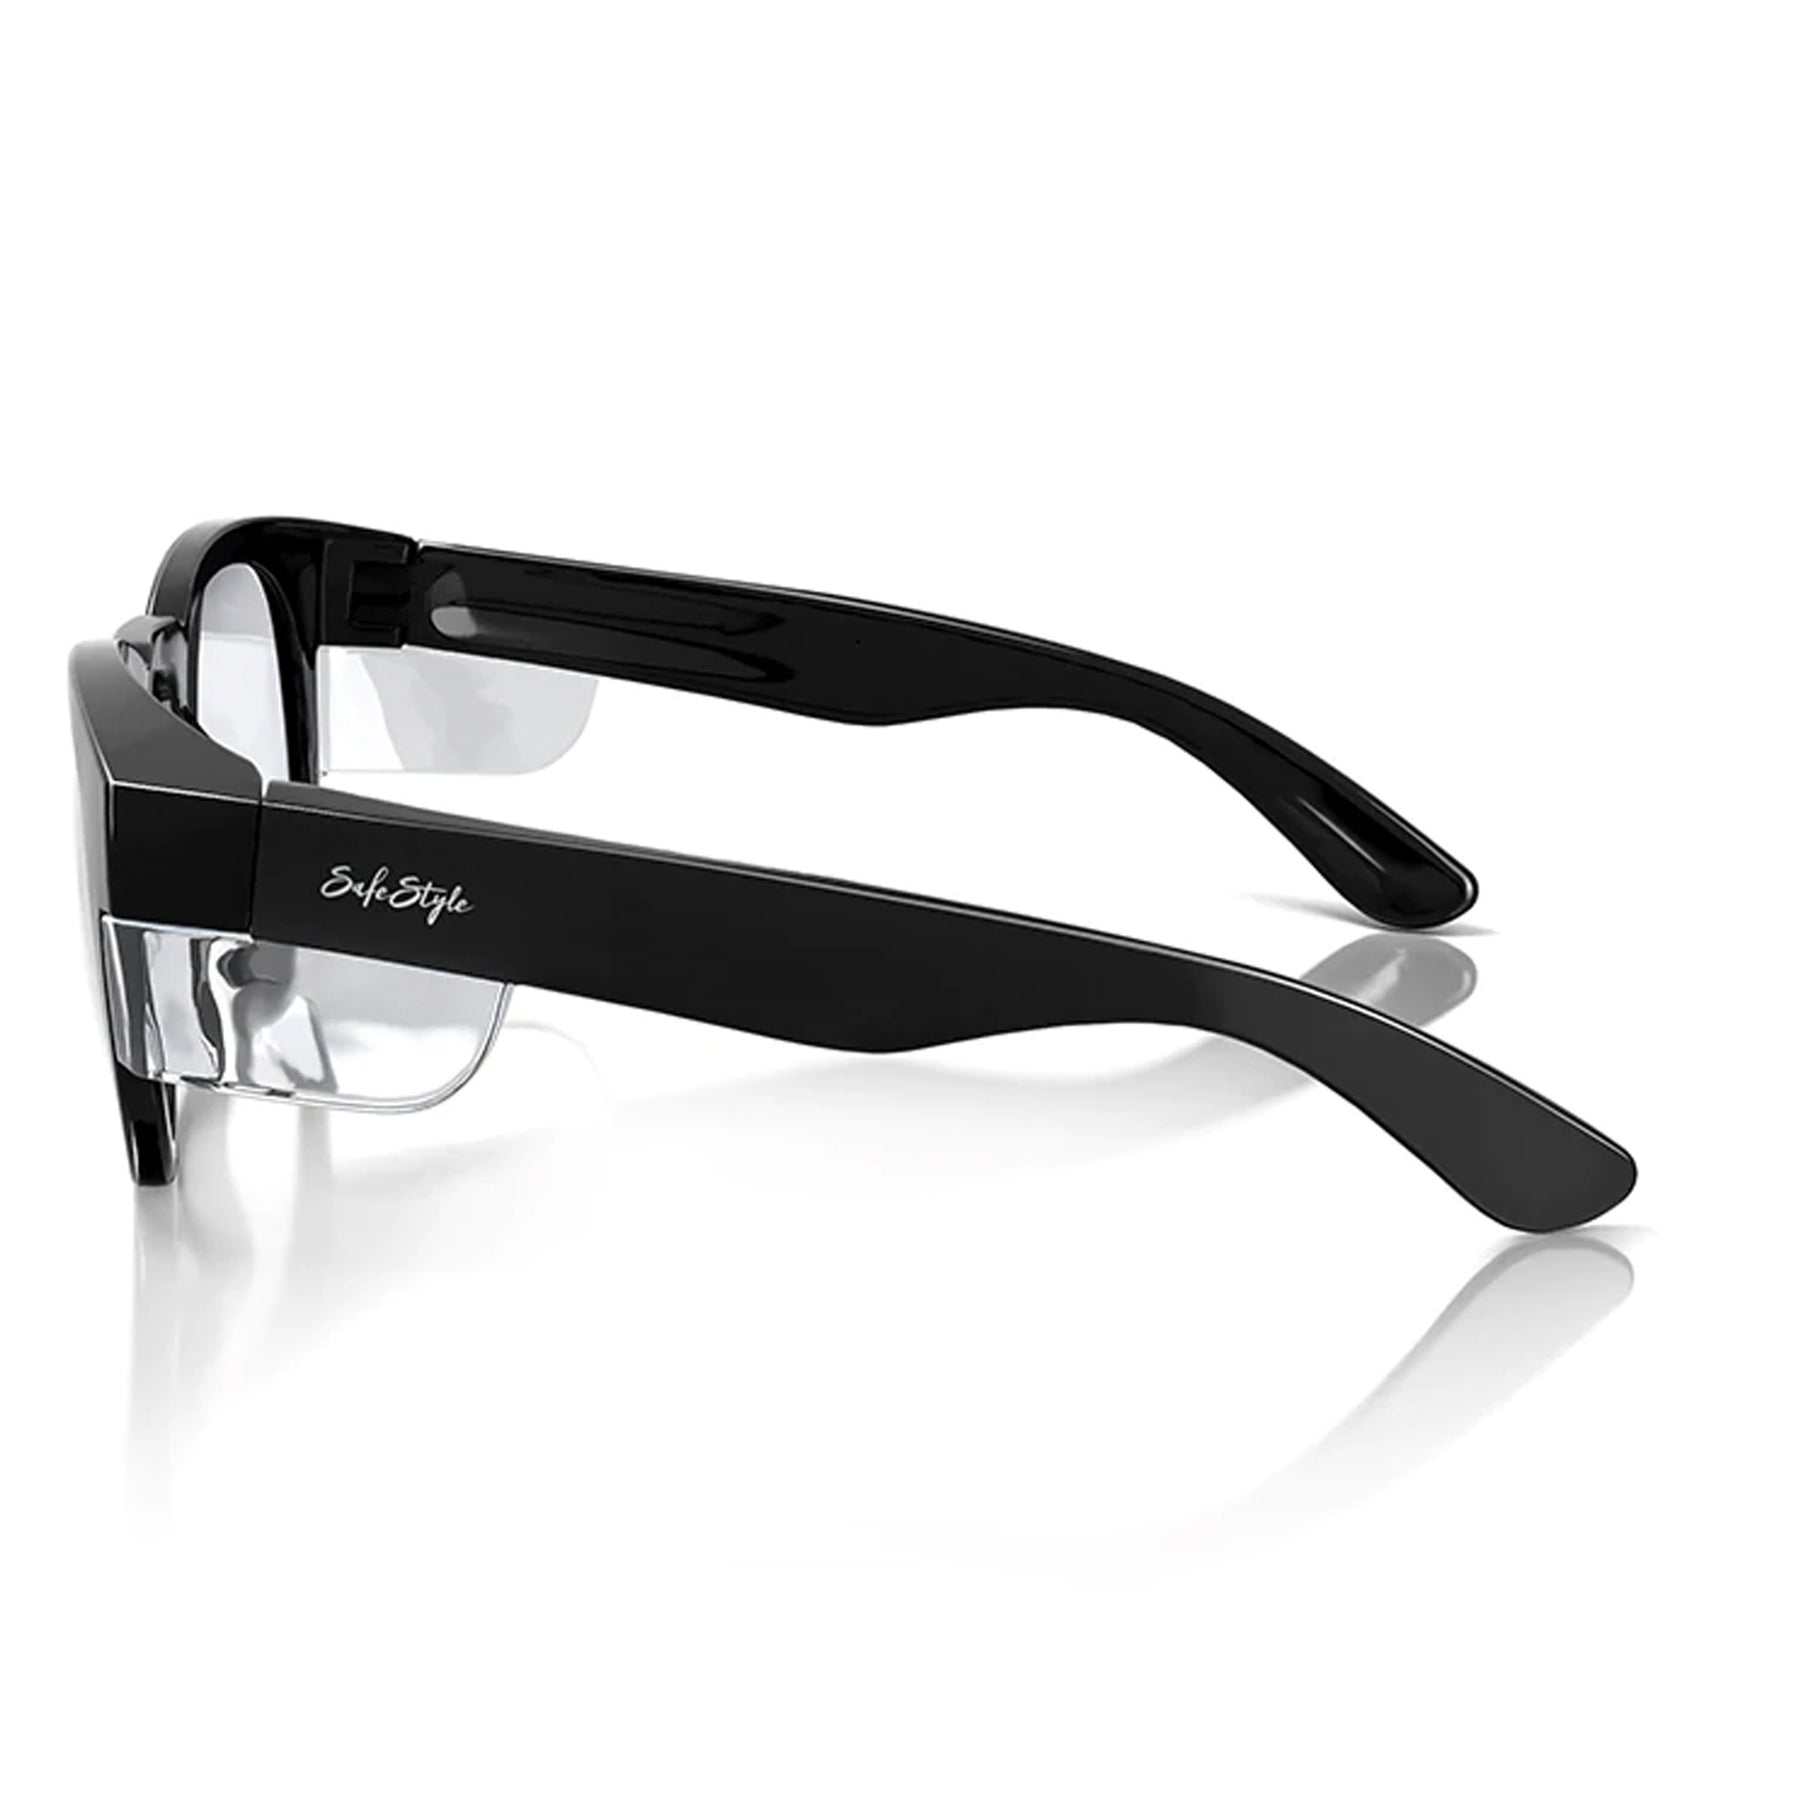 safestyle cruisers black frame safety glasses with clear lens